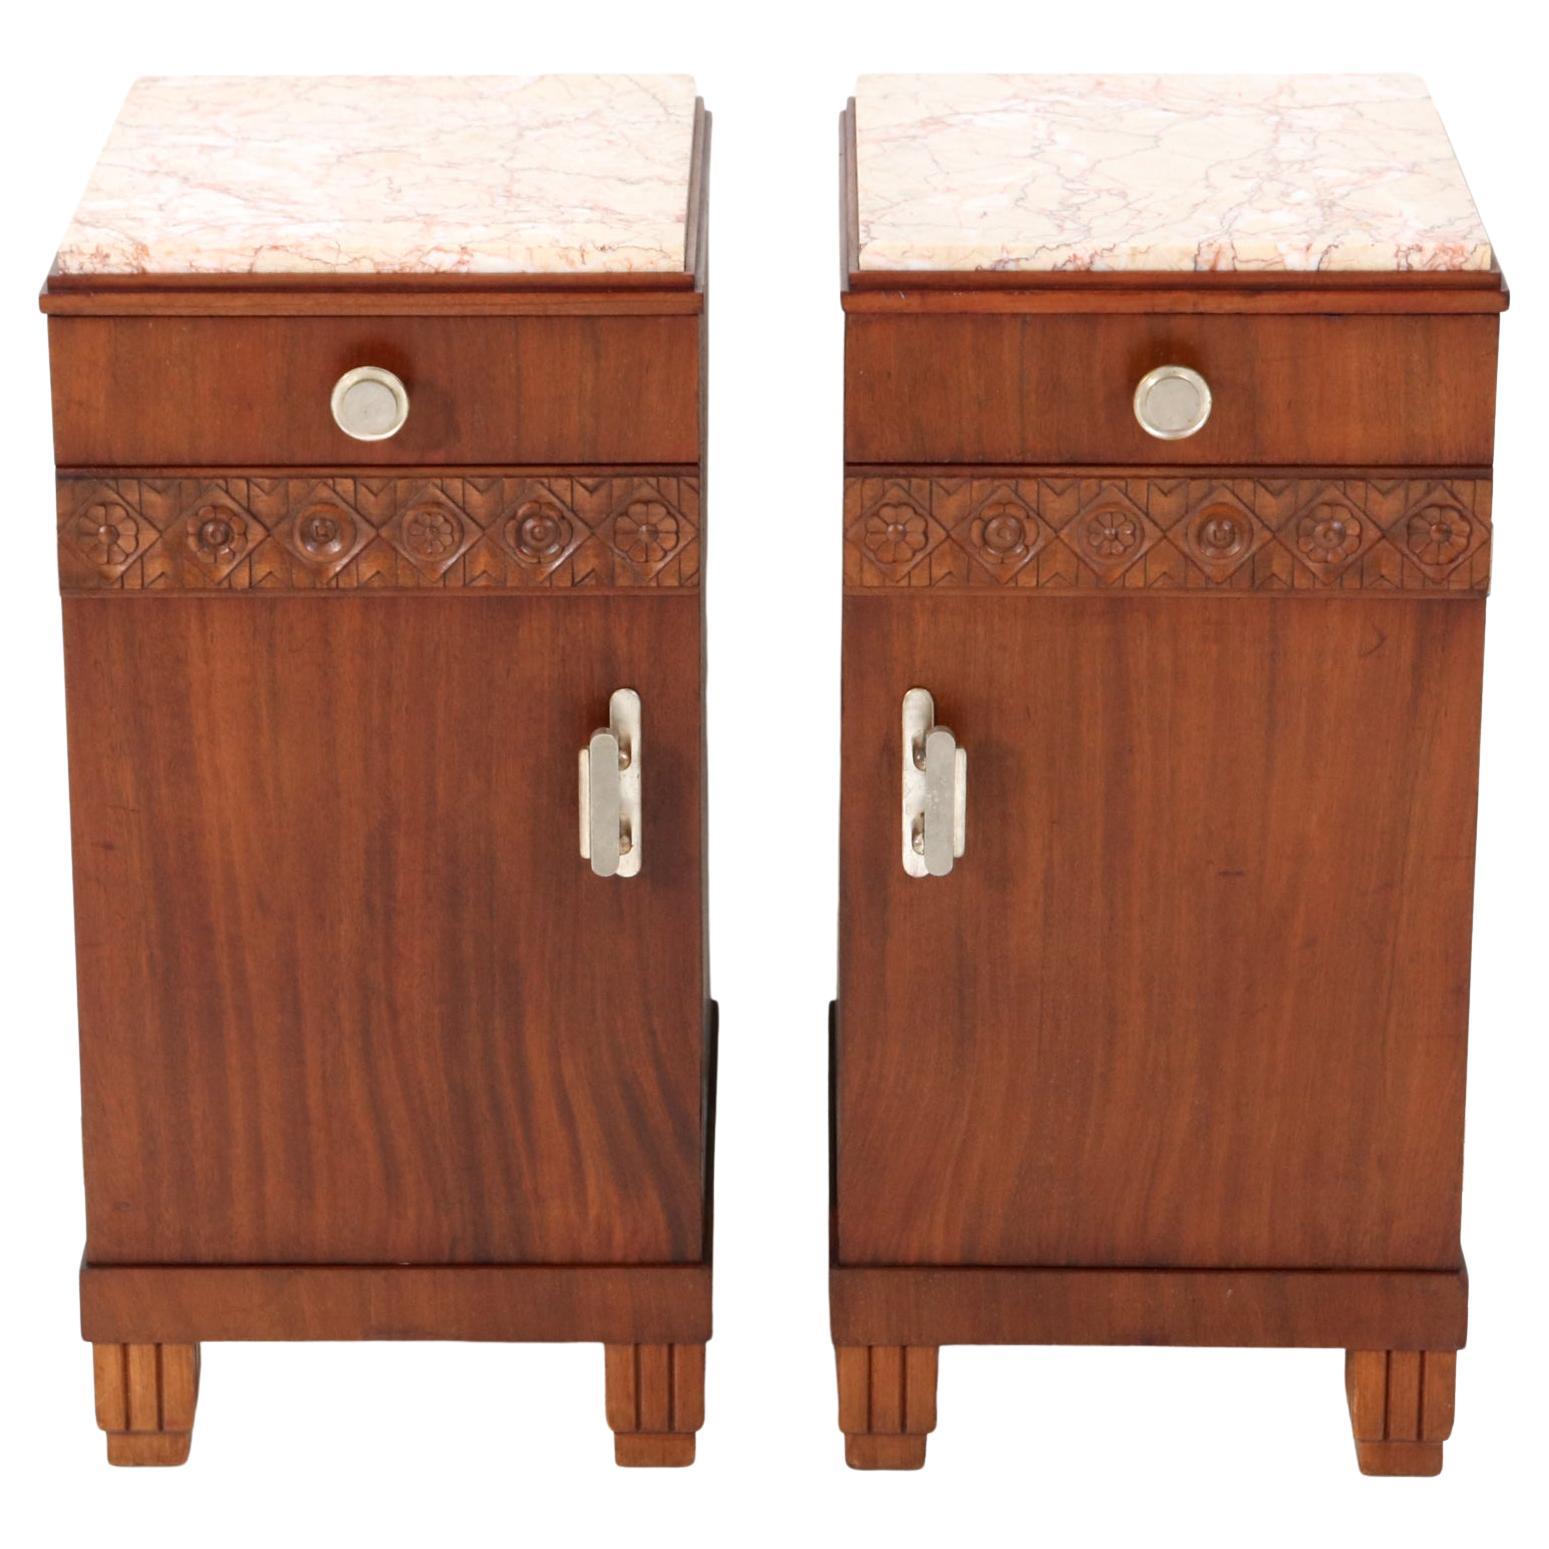 Two Walnut Art Deco Nightstands or Bedside Tables, 1930s For Sale